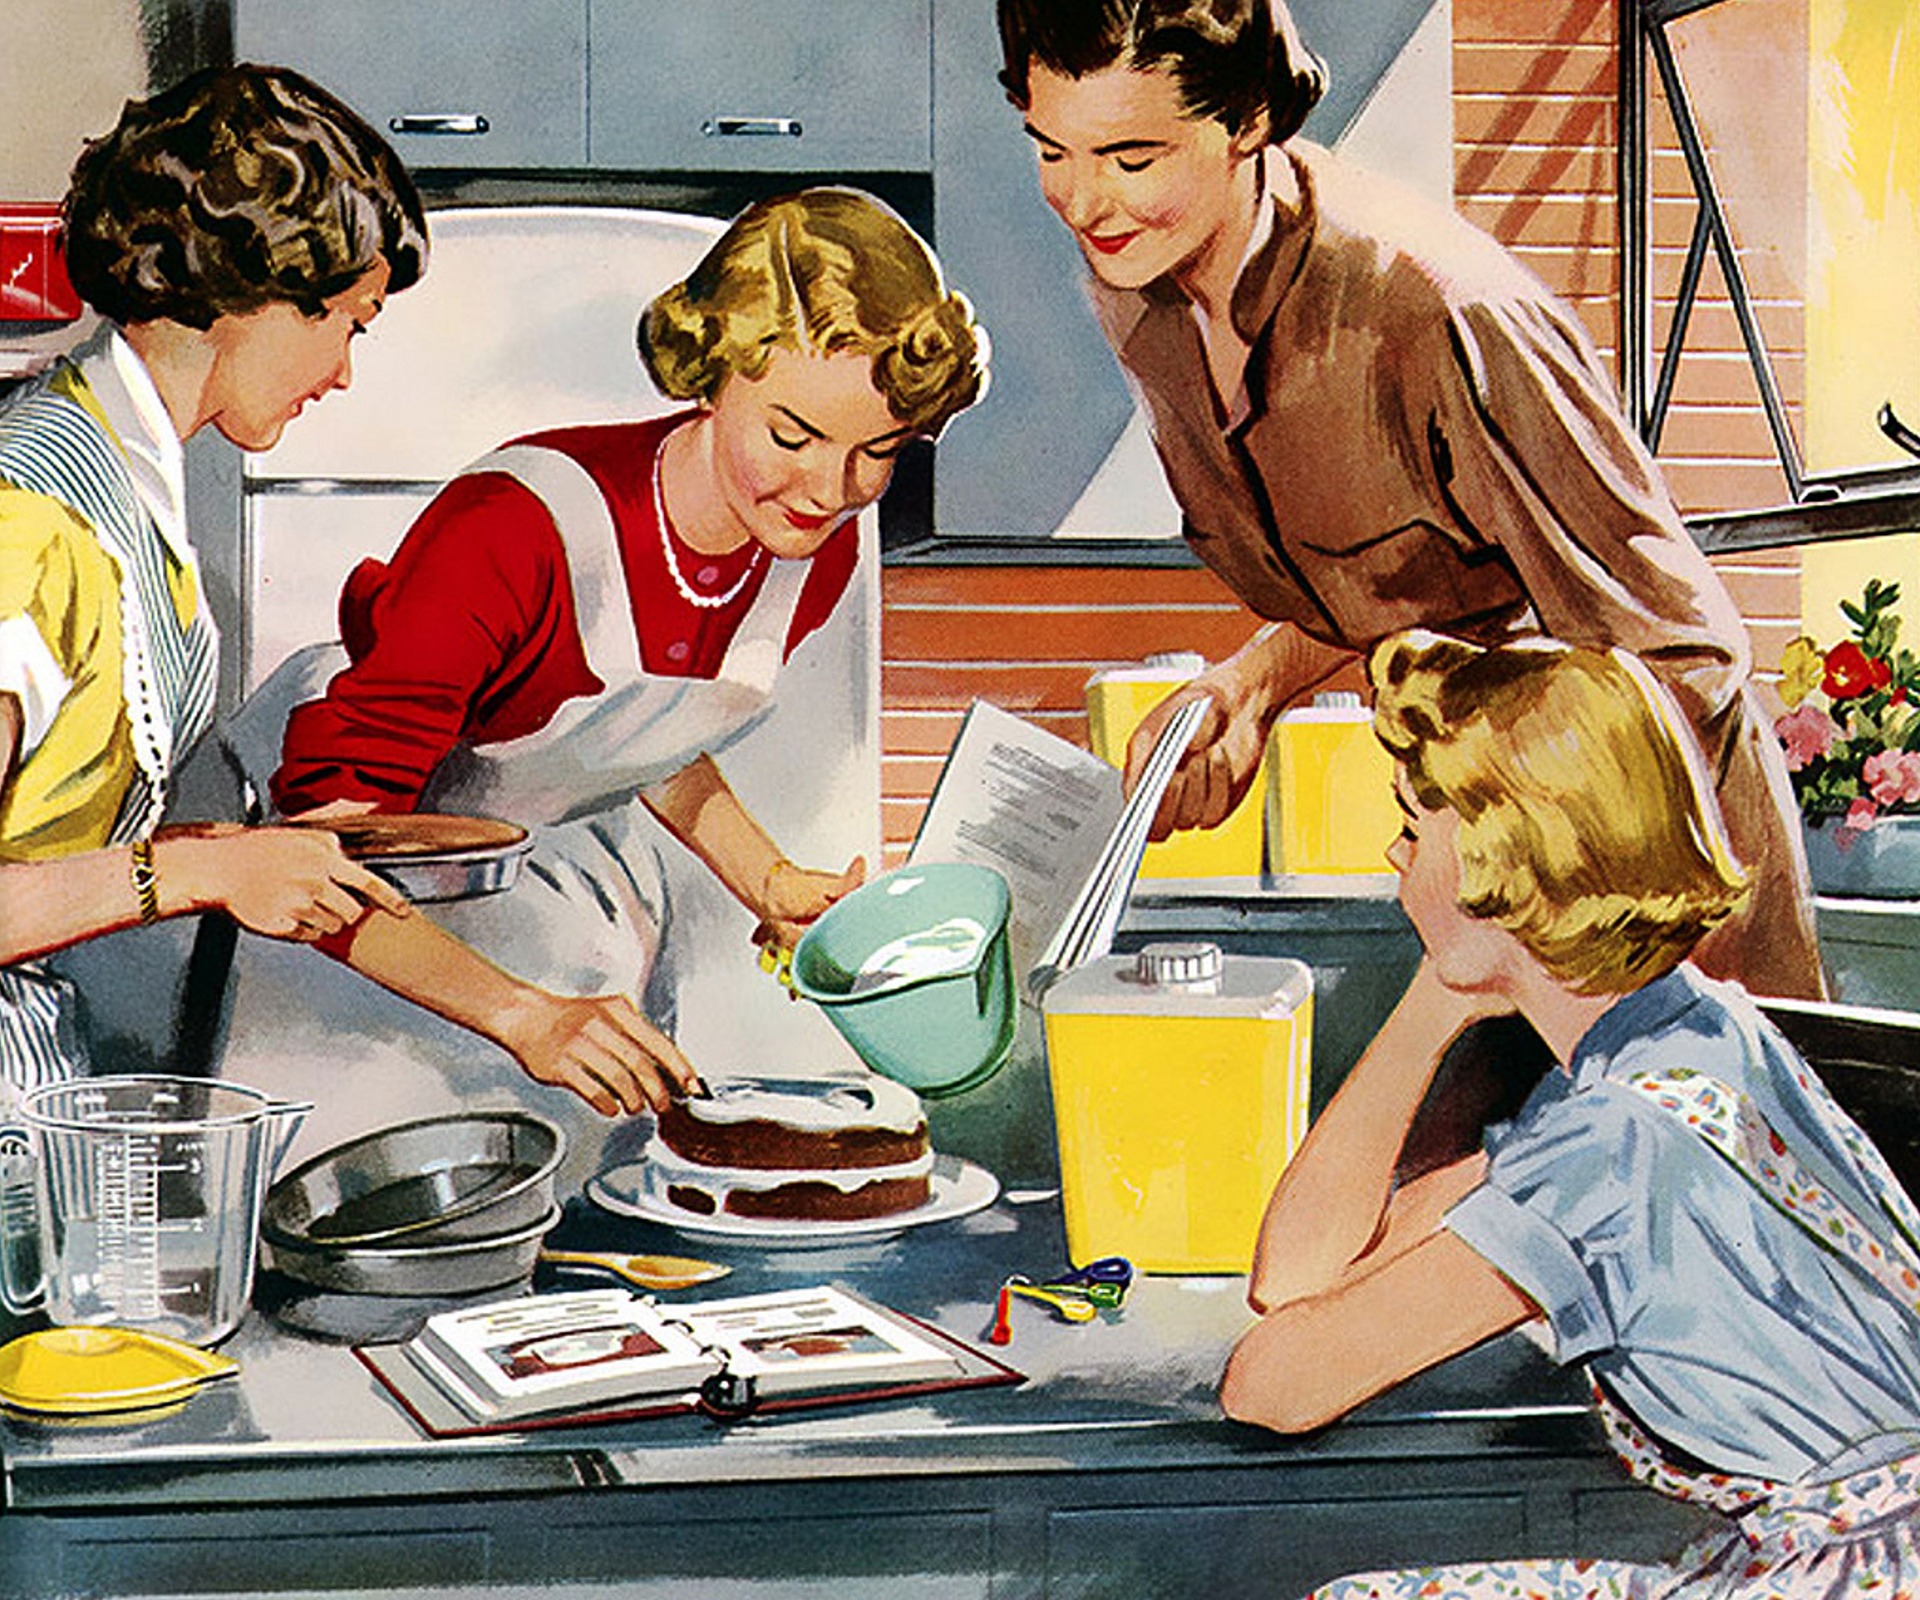 Retro drawing of four women baking a cake together in a kitchen.